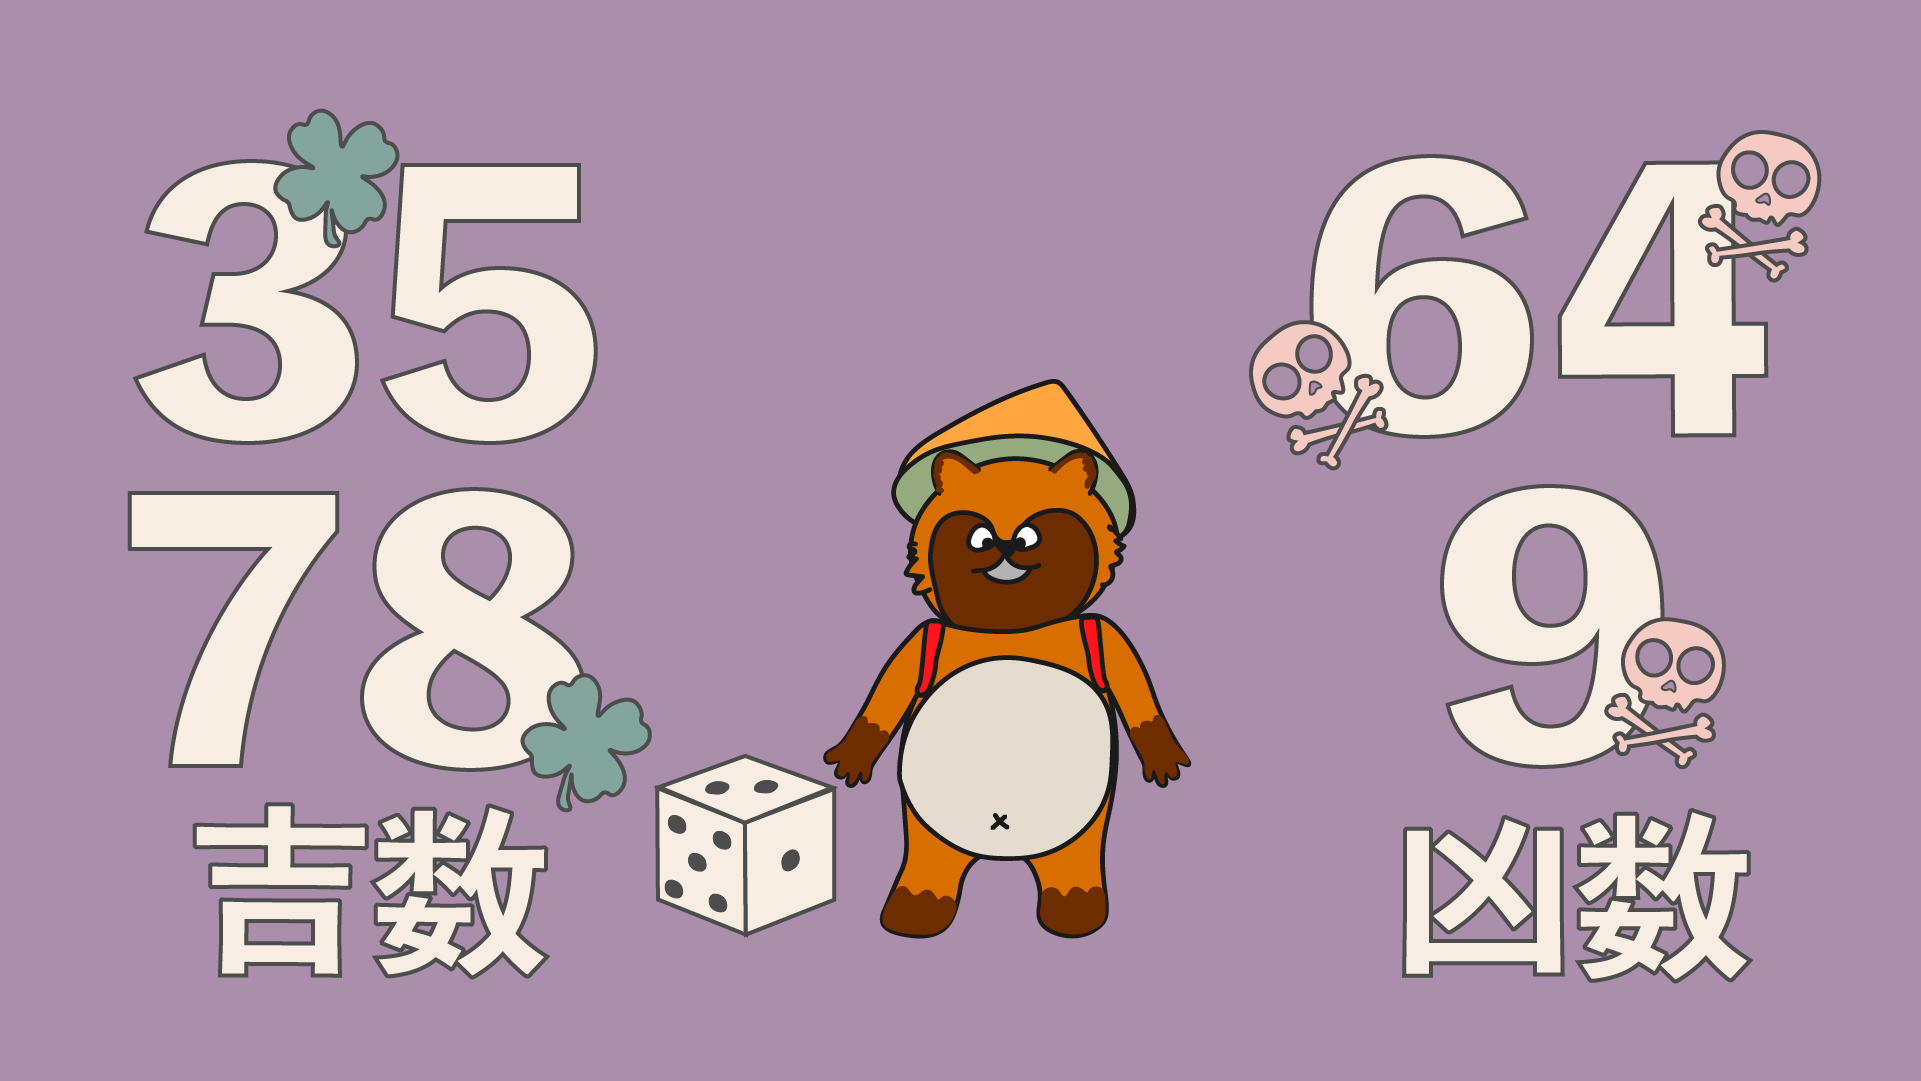 Unlucky and lucky numbers in Japan wanderingtanuki